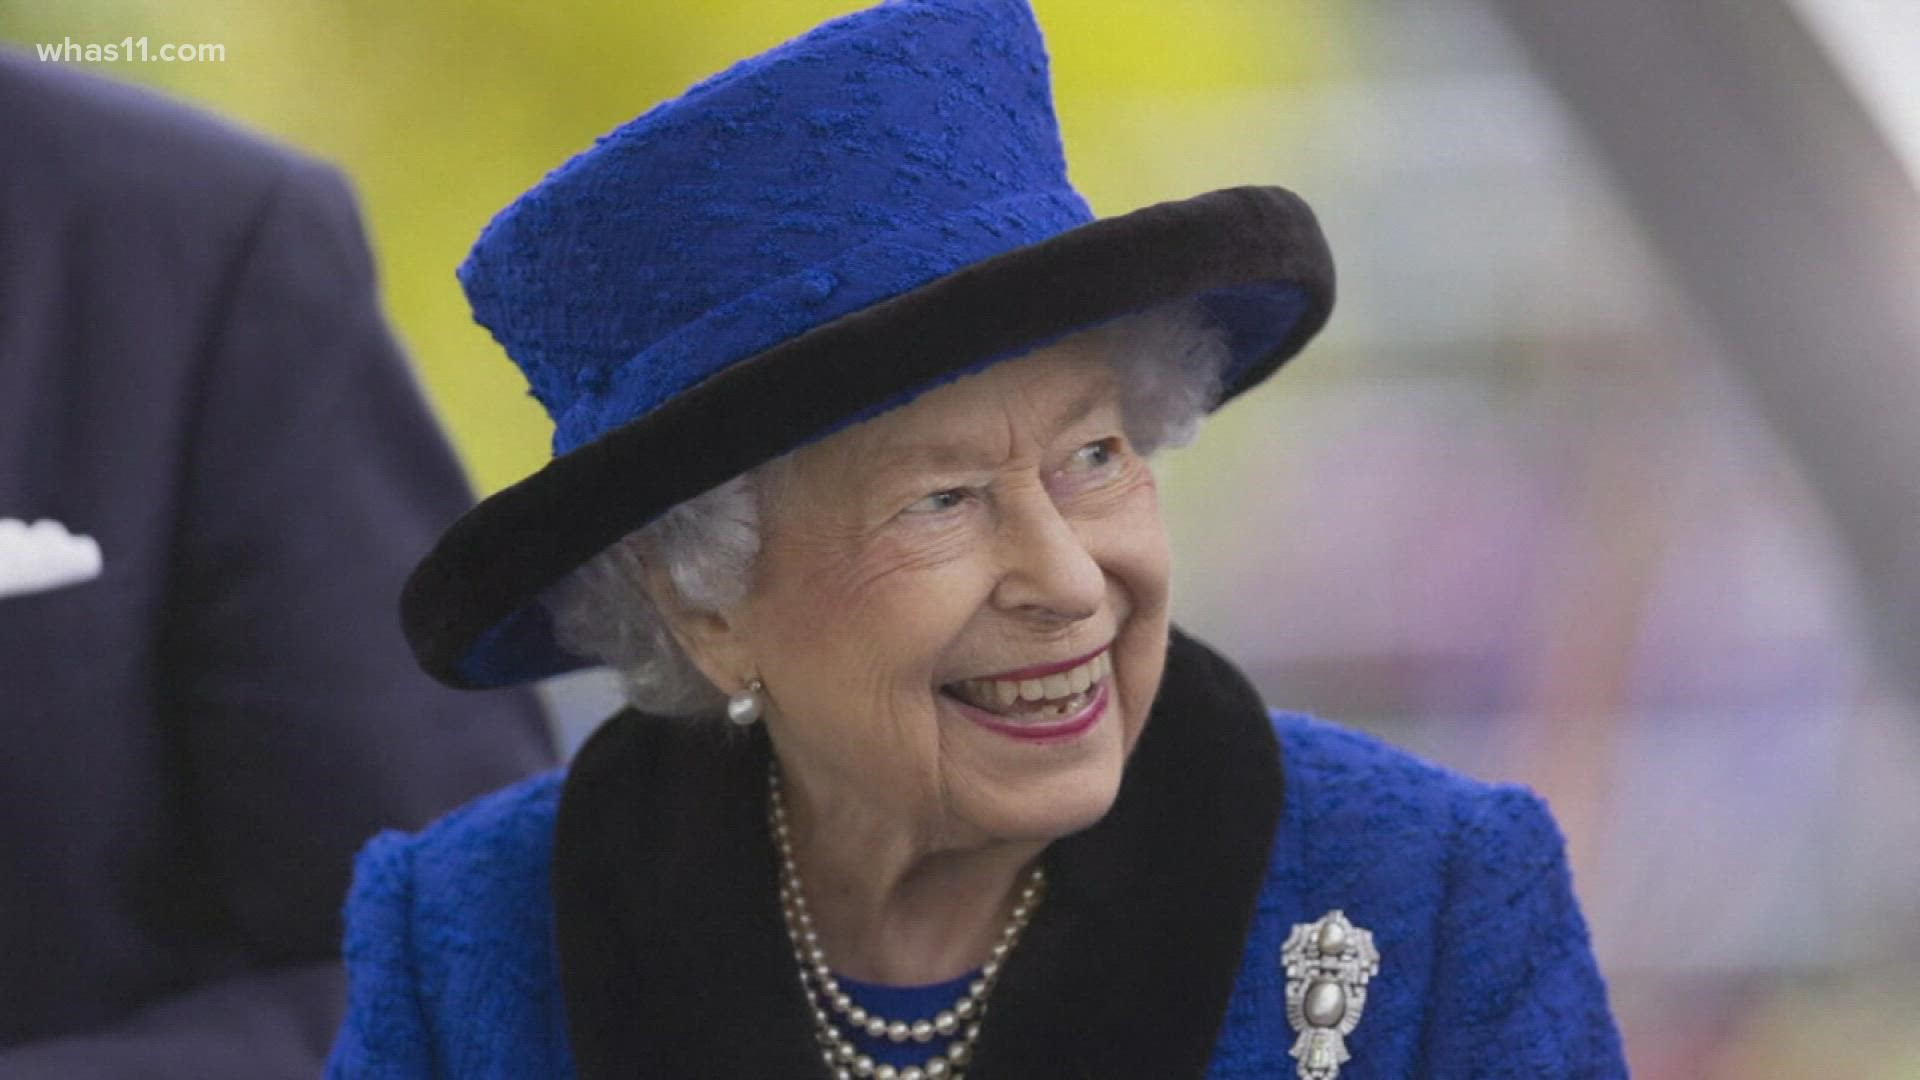 Queen Elizabeth II spent a night in a hospital for checks this week after canceling an official trip to Northern Ireland on medical advice, Buckingham Palace said.